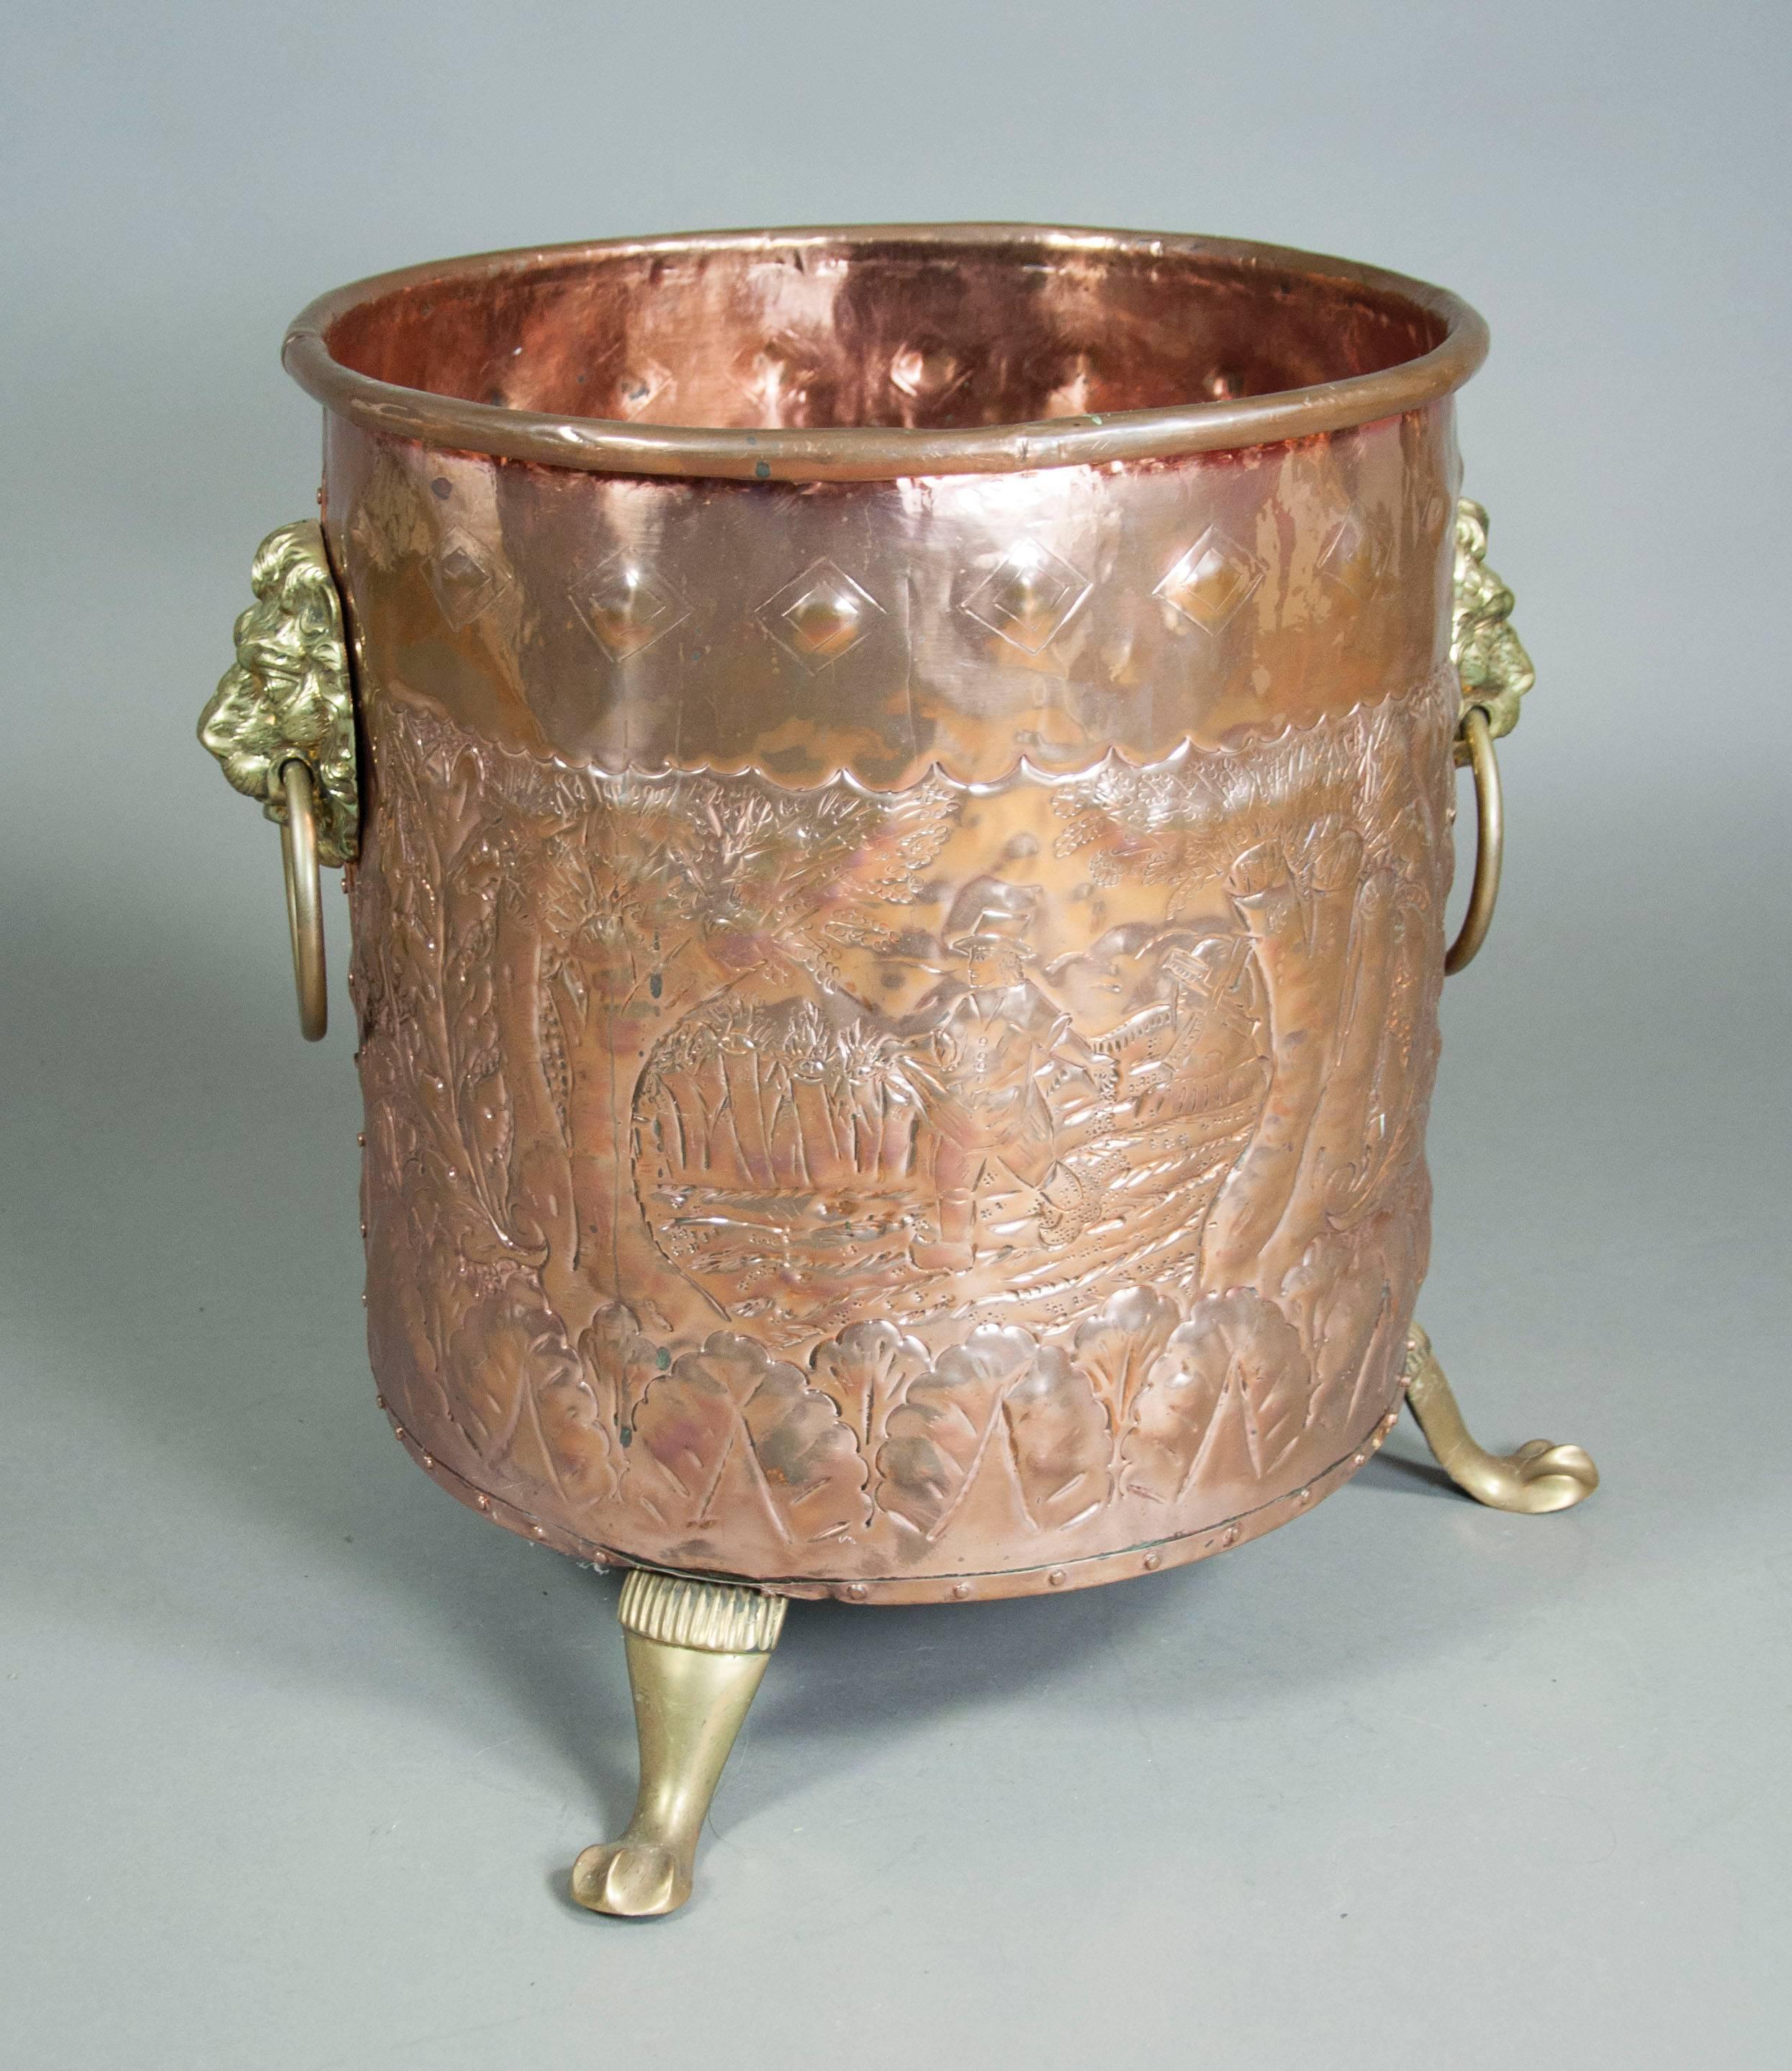 Hand hammered decorated copper body with mounted brass lions heads and brass legs